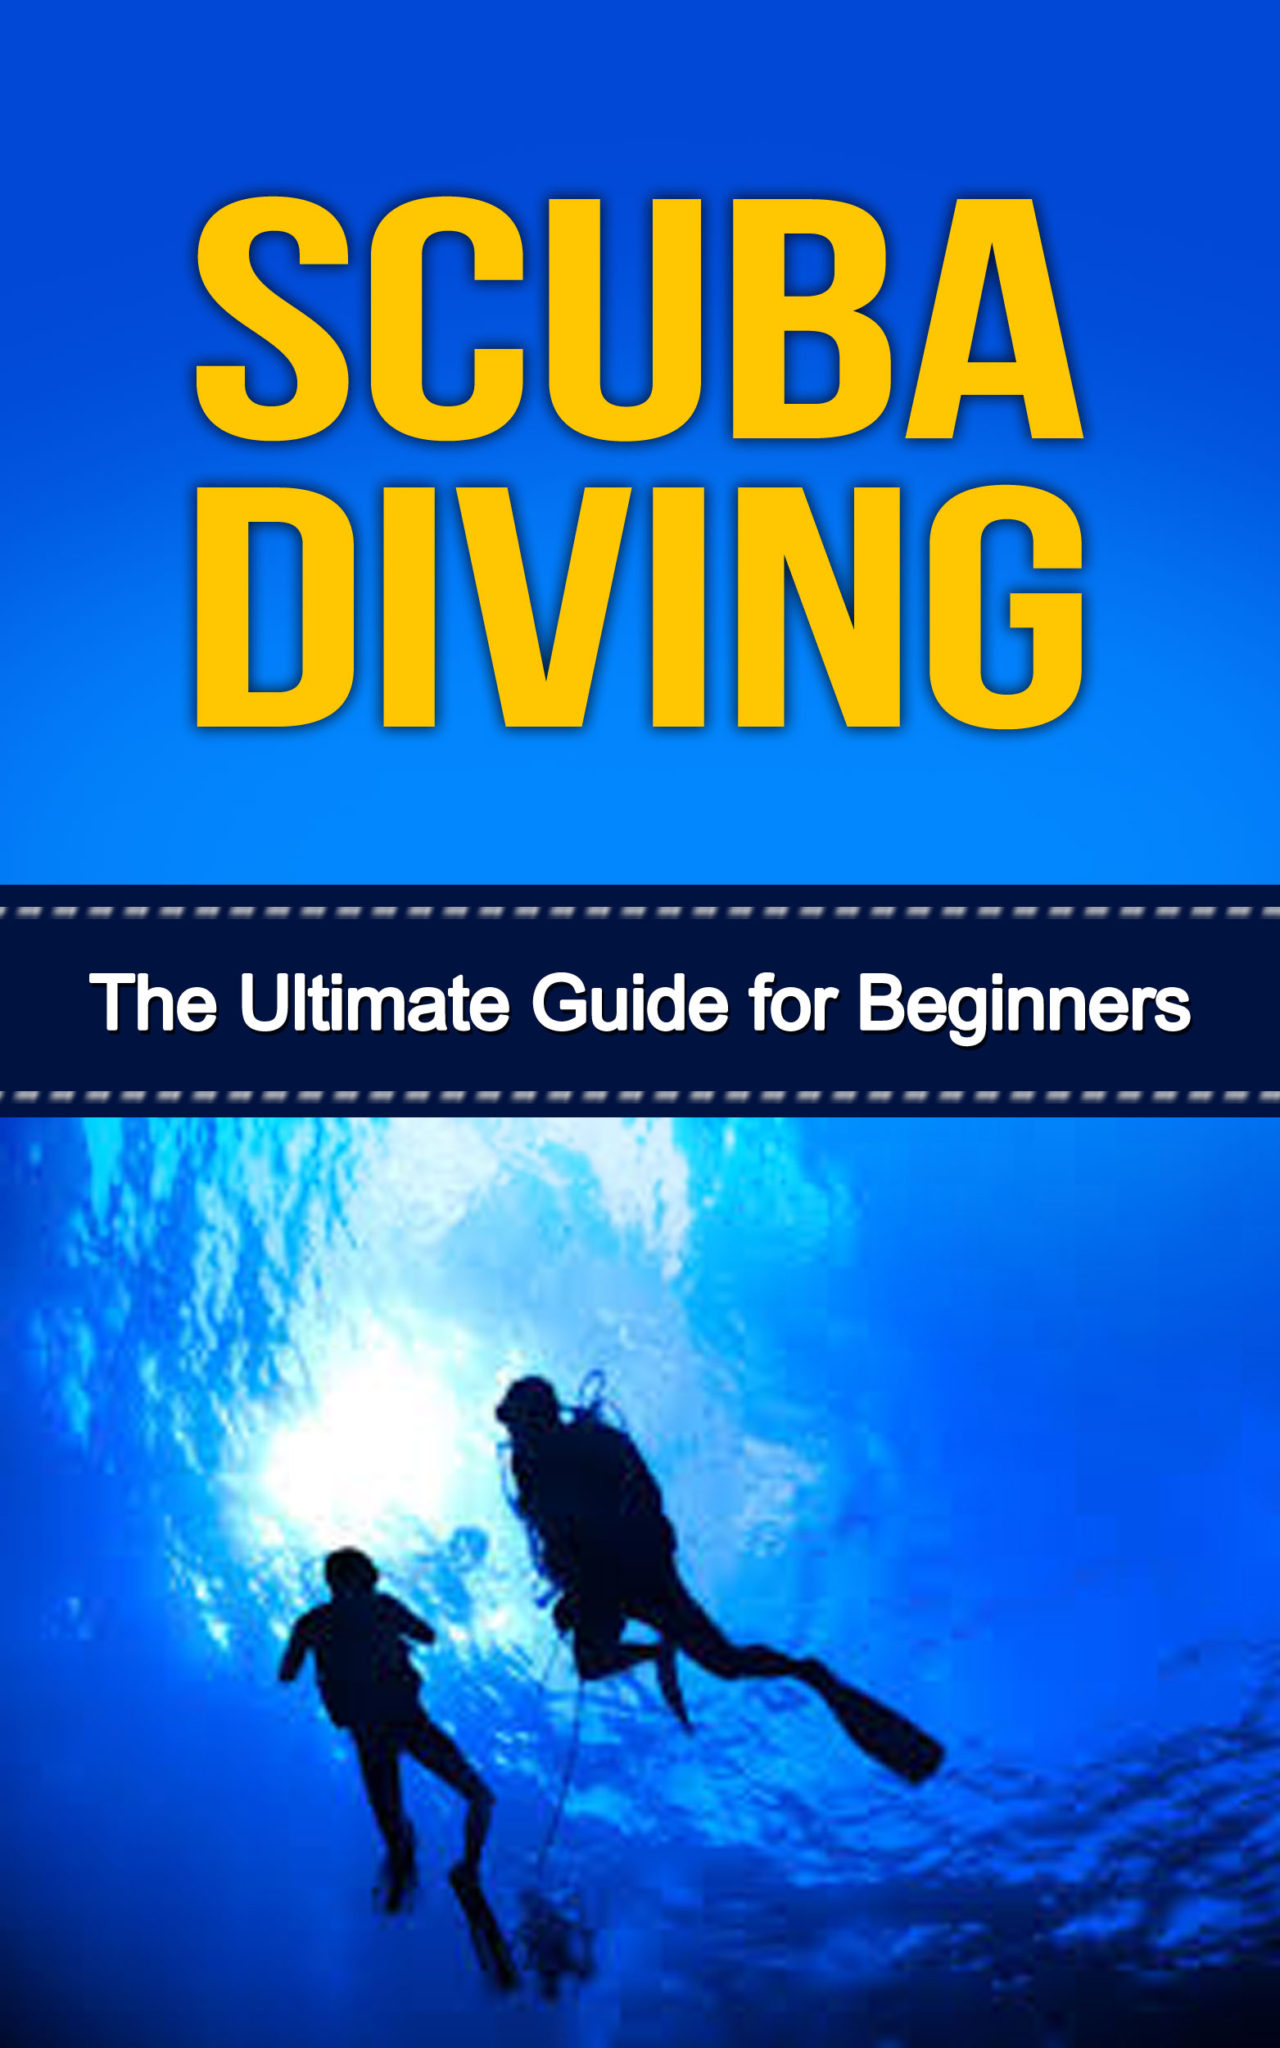 FREE: Scuba Diving: The Ultimate Guide for Beginners by Allen Smith